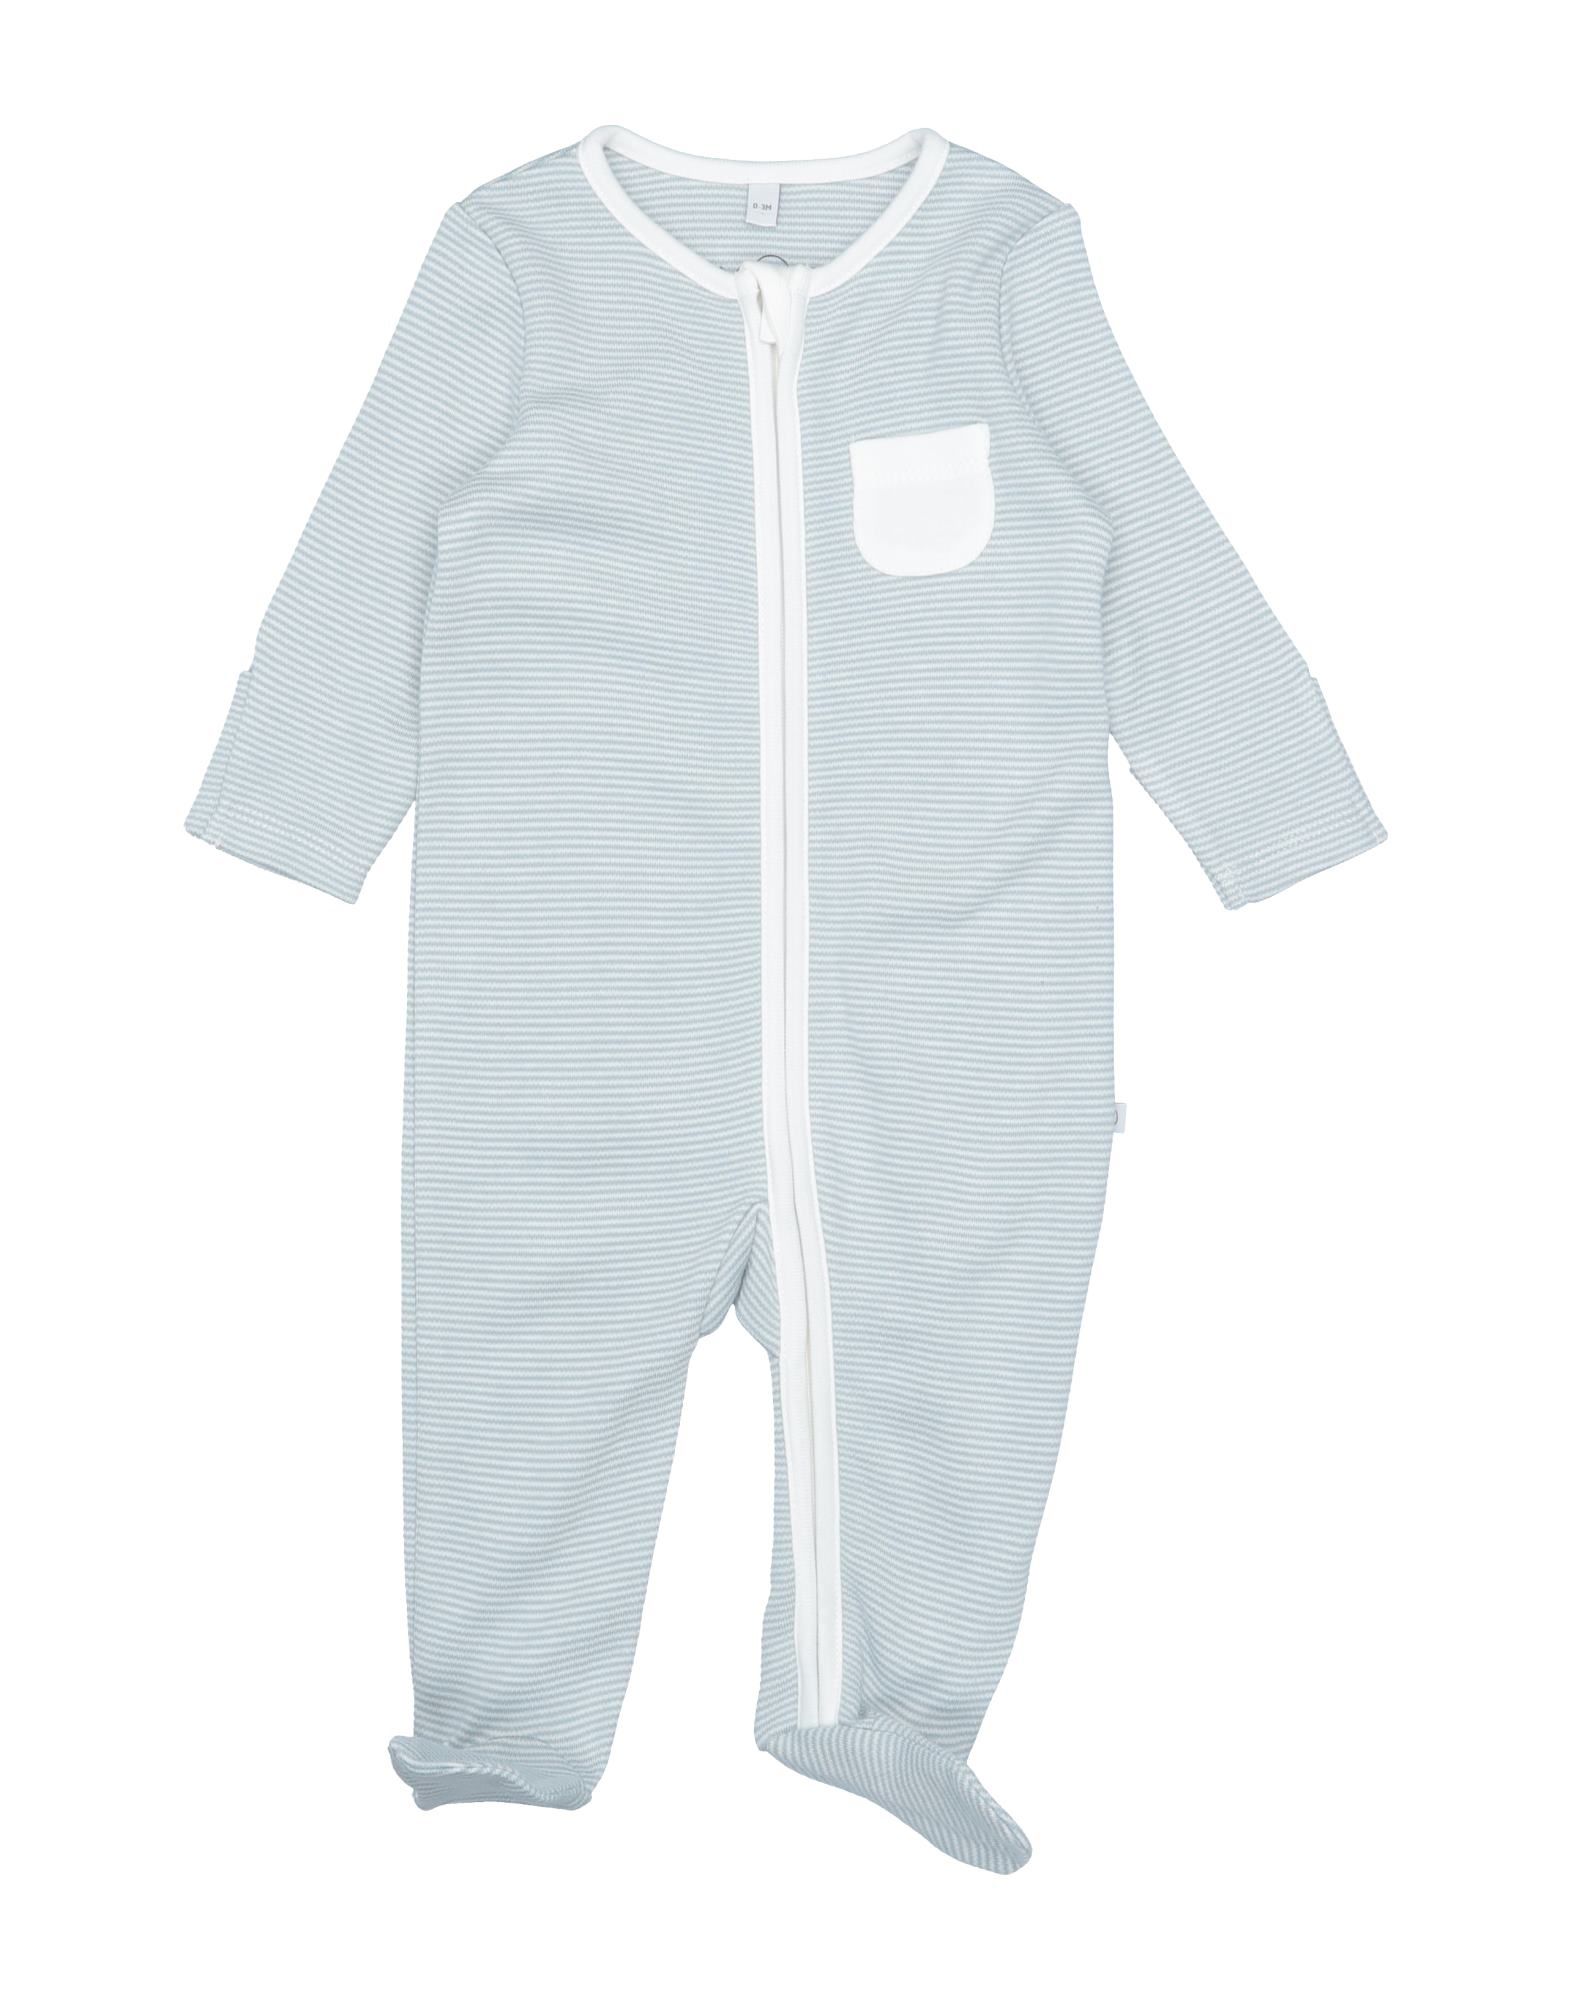 Mori Kids' One-pieces In Blue